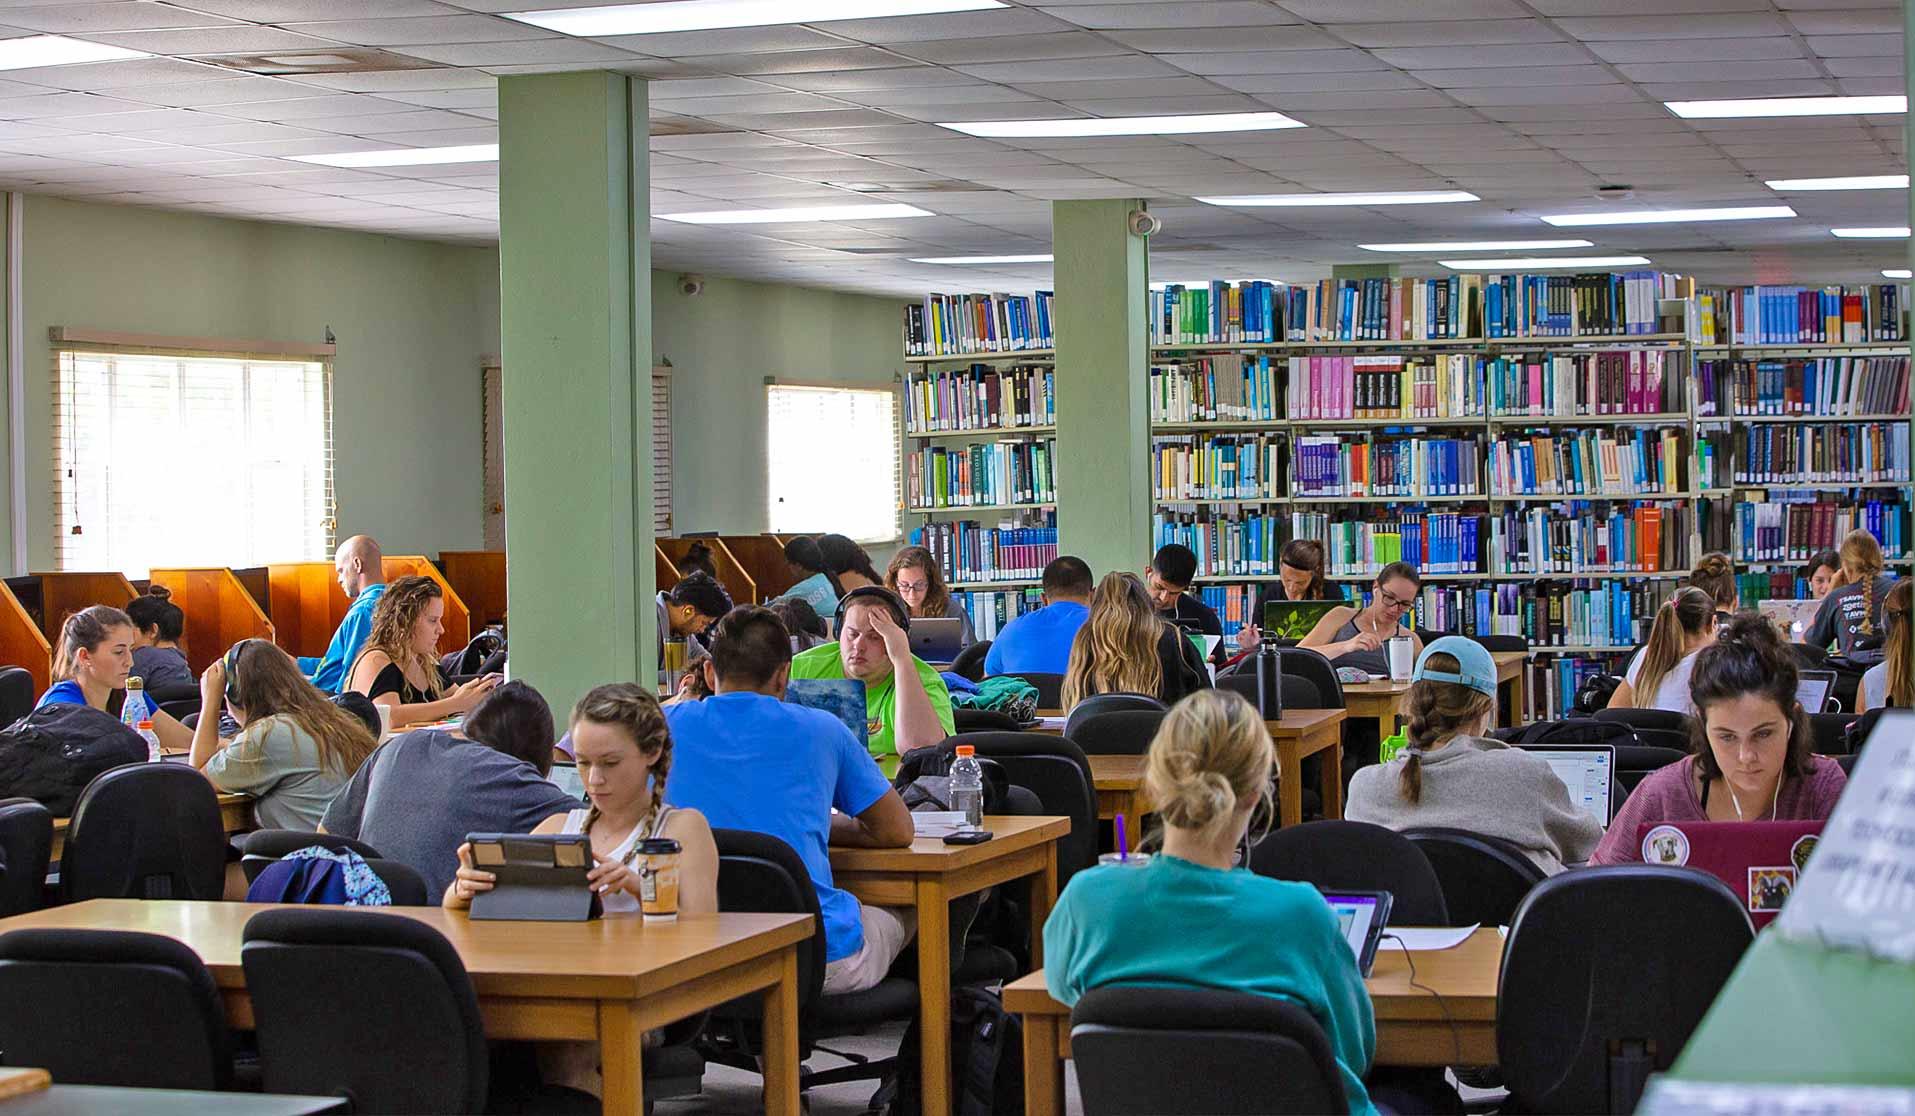 Students in the Ross Vet library on campus